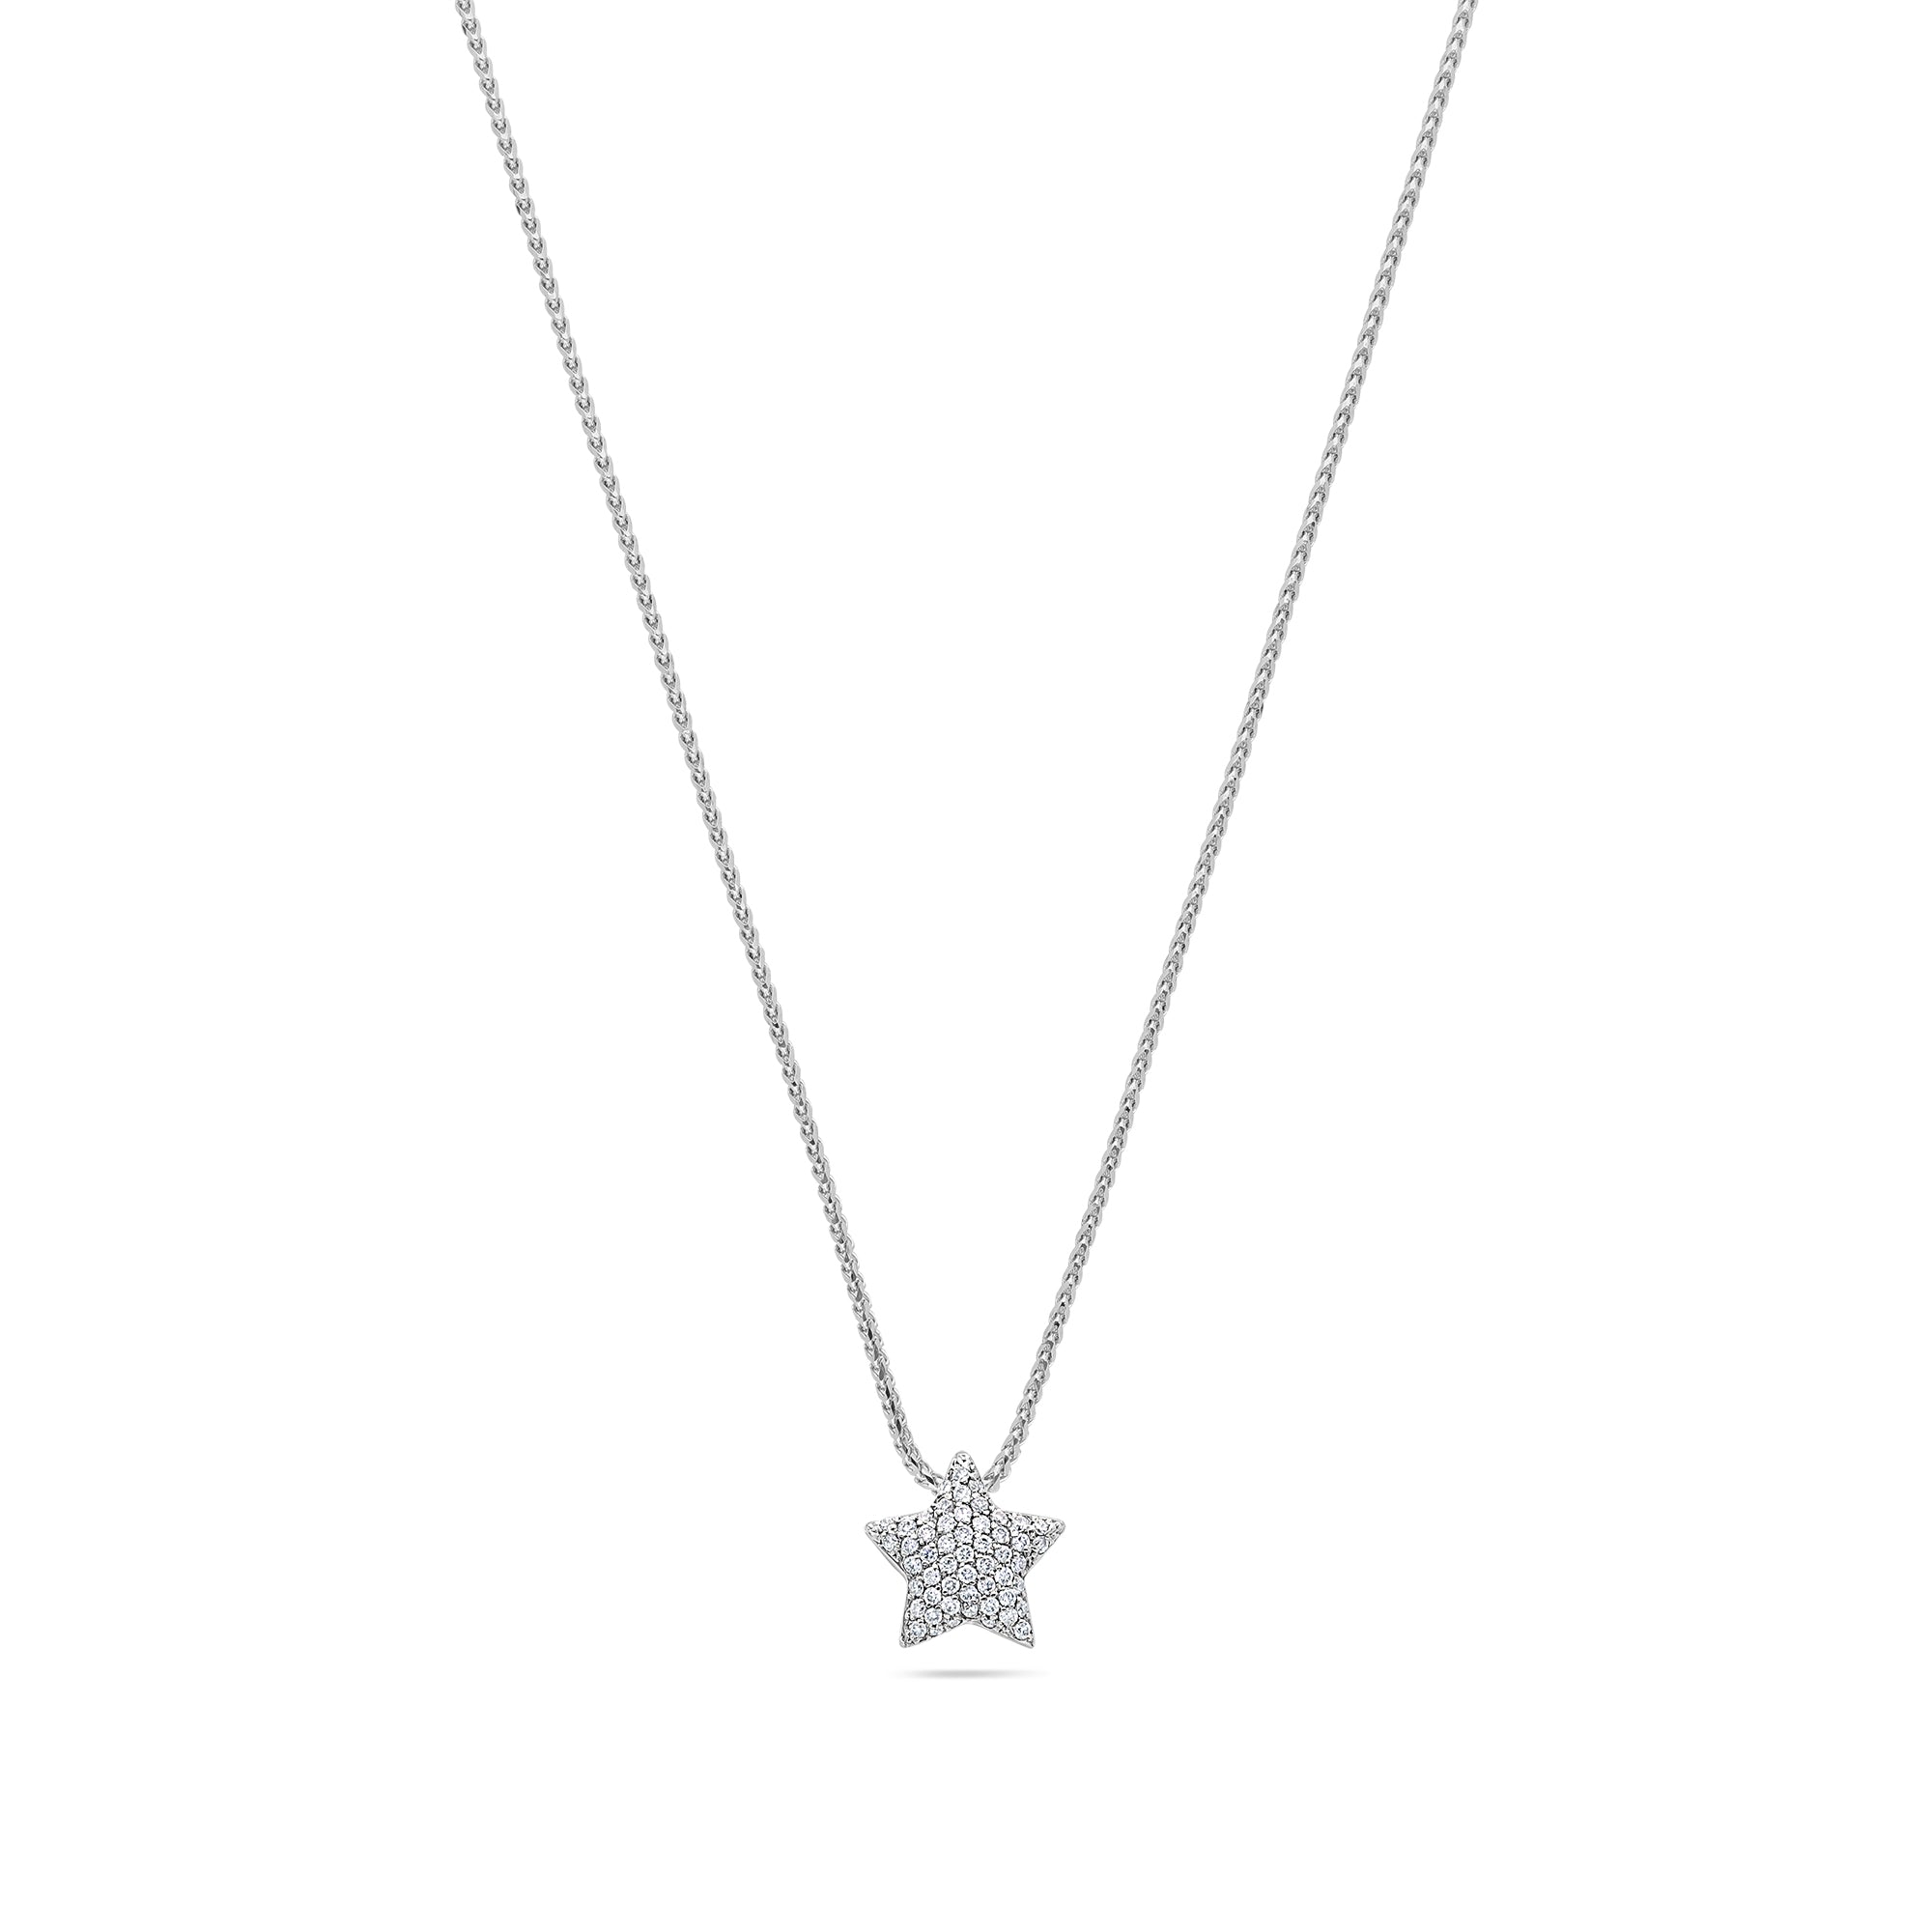 Pico Star Necklace (14K YELLOW GOLD) - IF & Co. Custom Jewelers